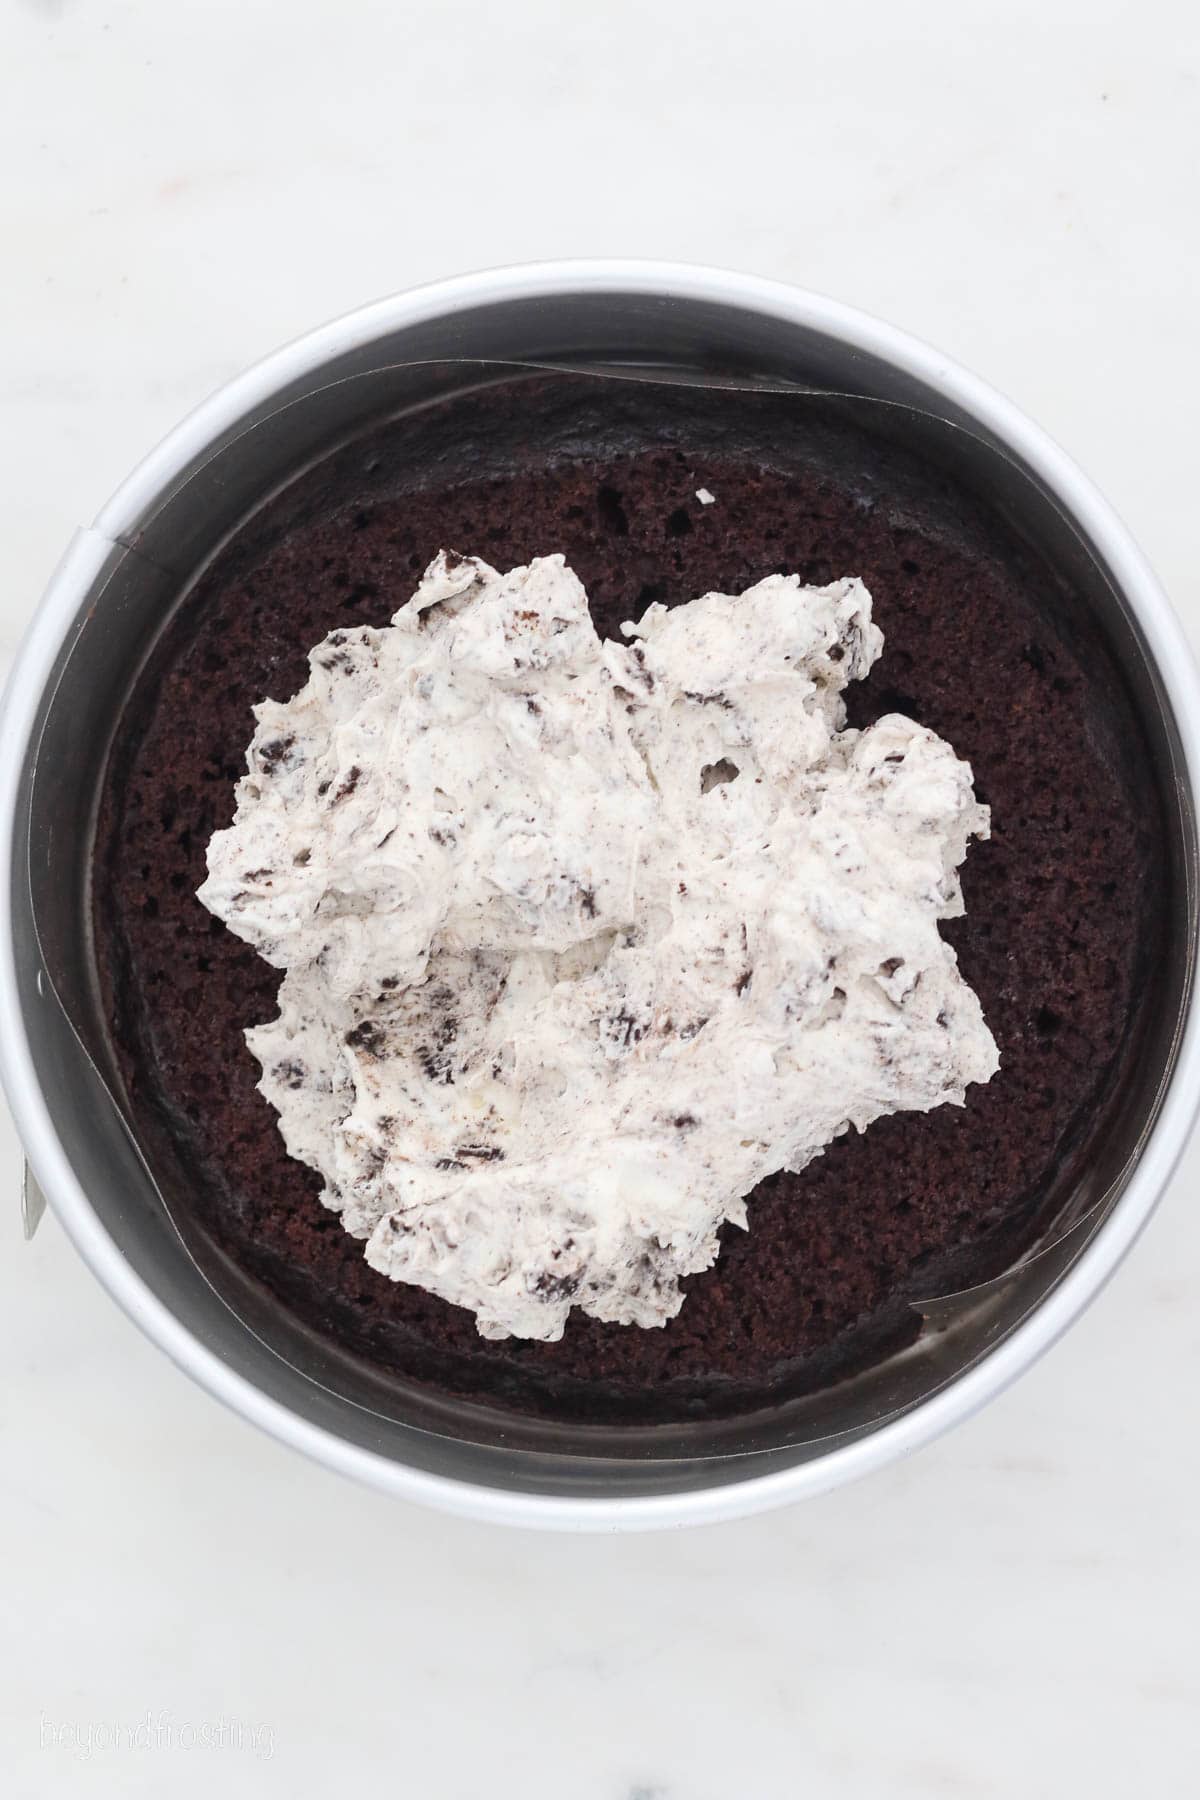 Oreo ice cream added over top of chocolate cake in a springform pan.